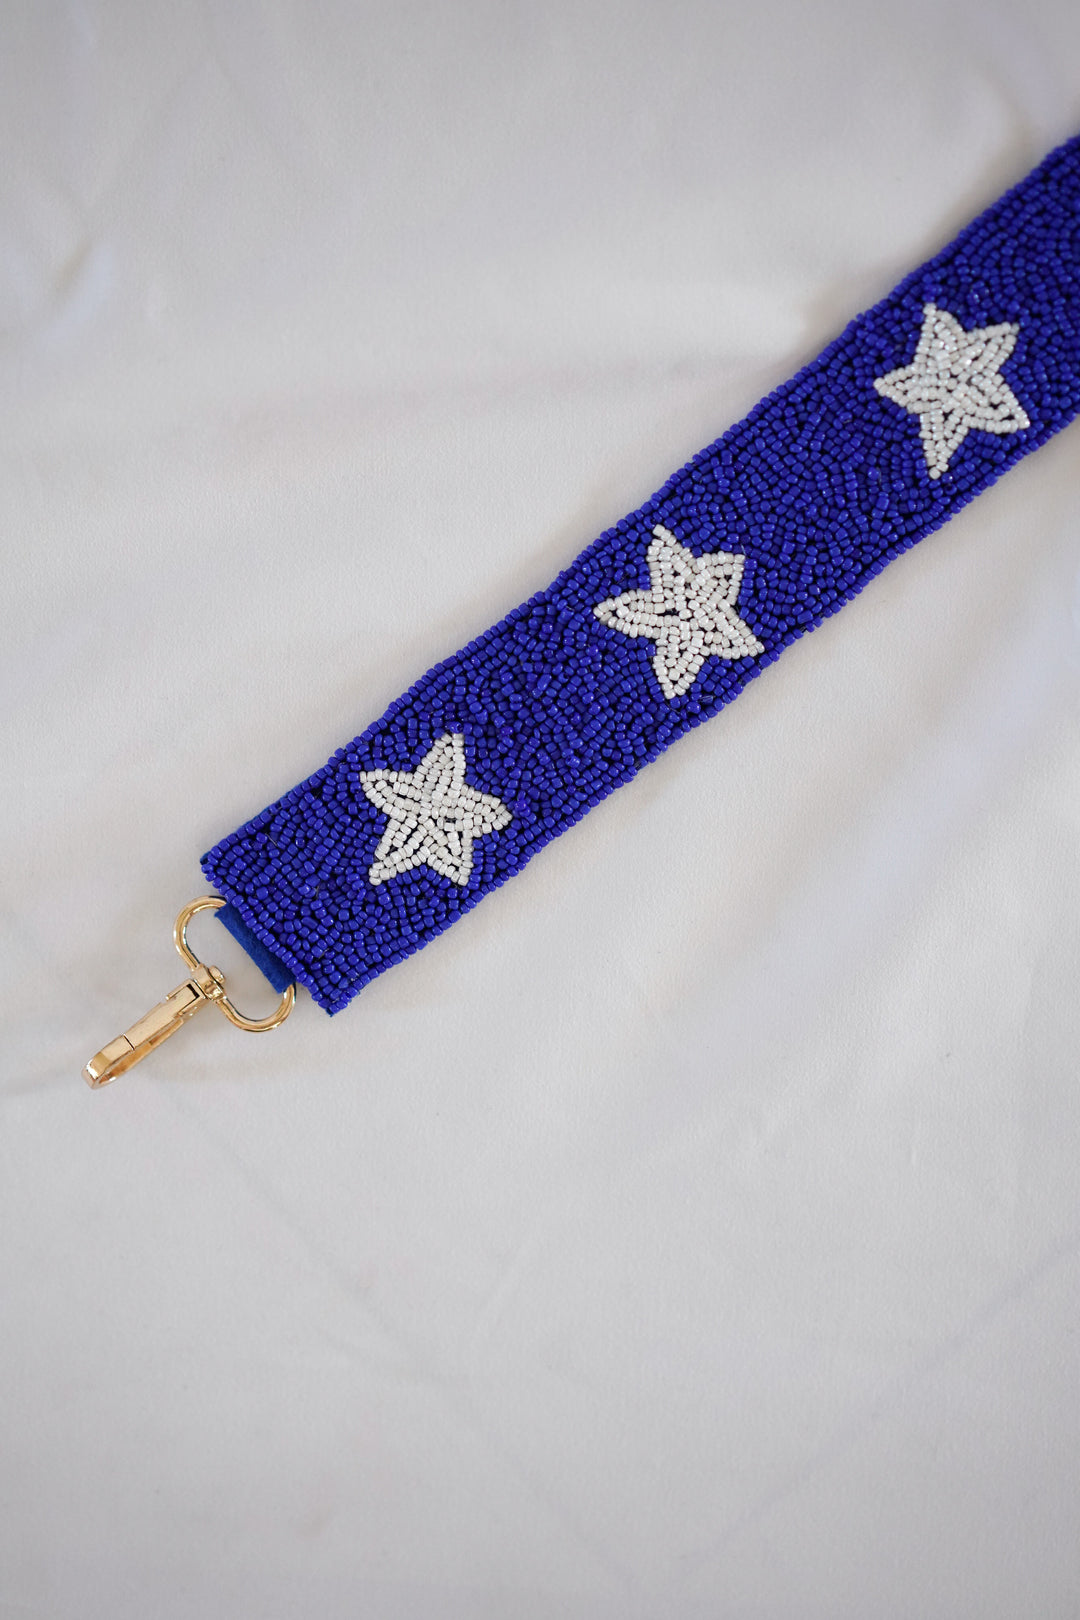 Blue and White Seed Bead Crossbody Star Purse Strap